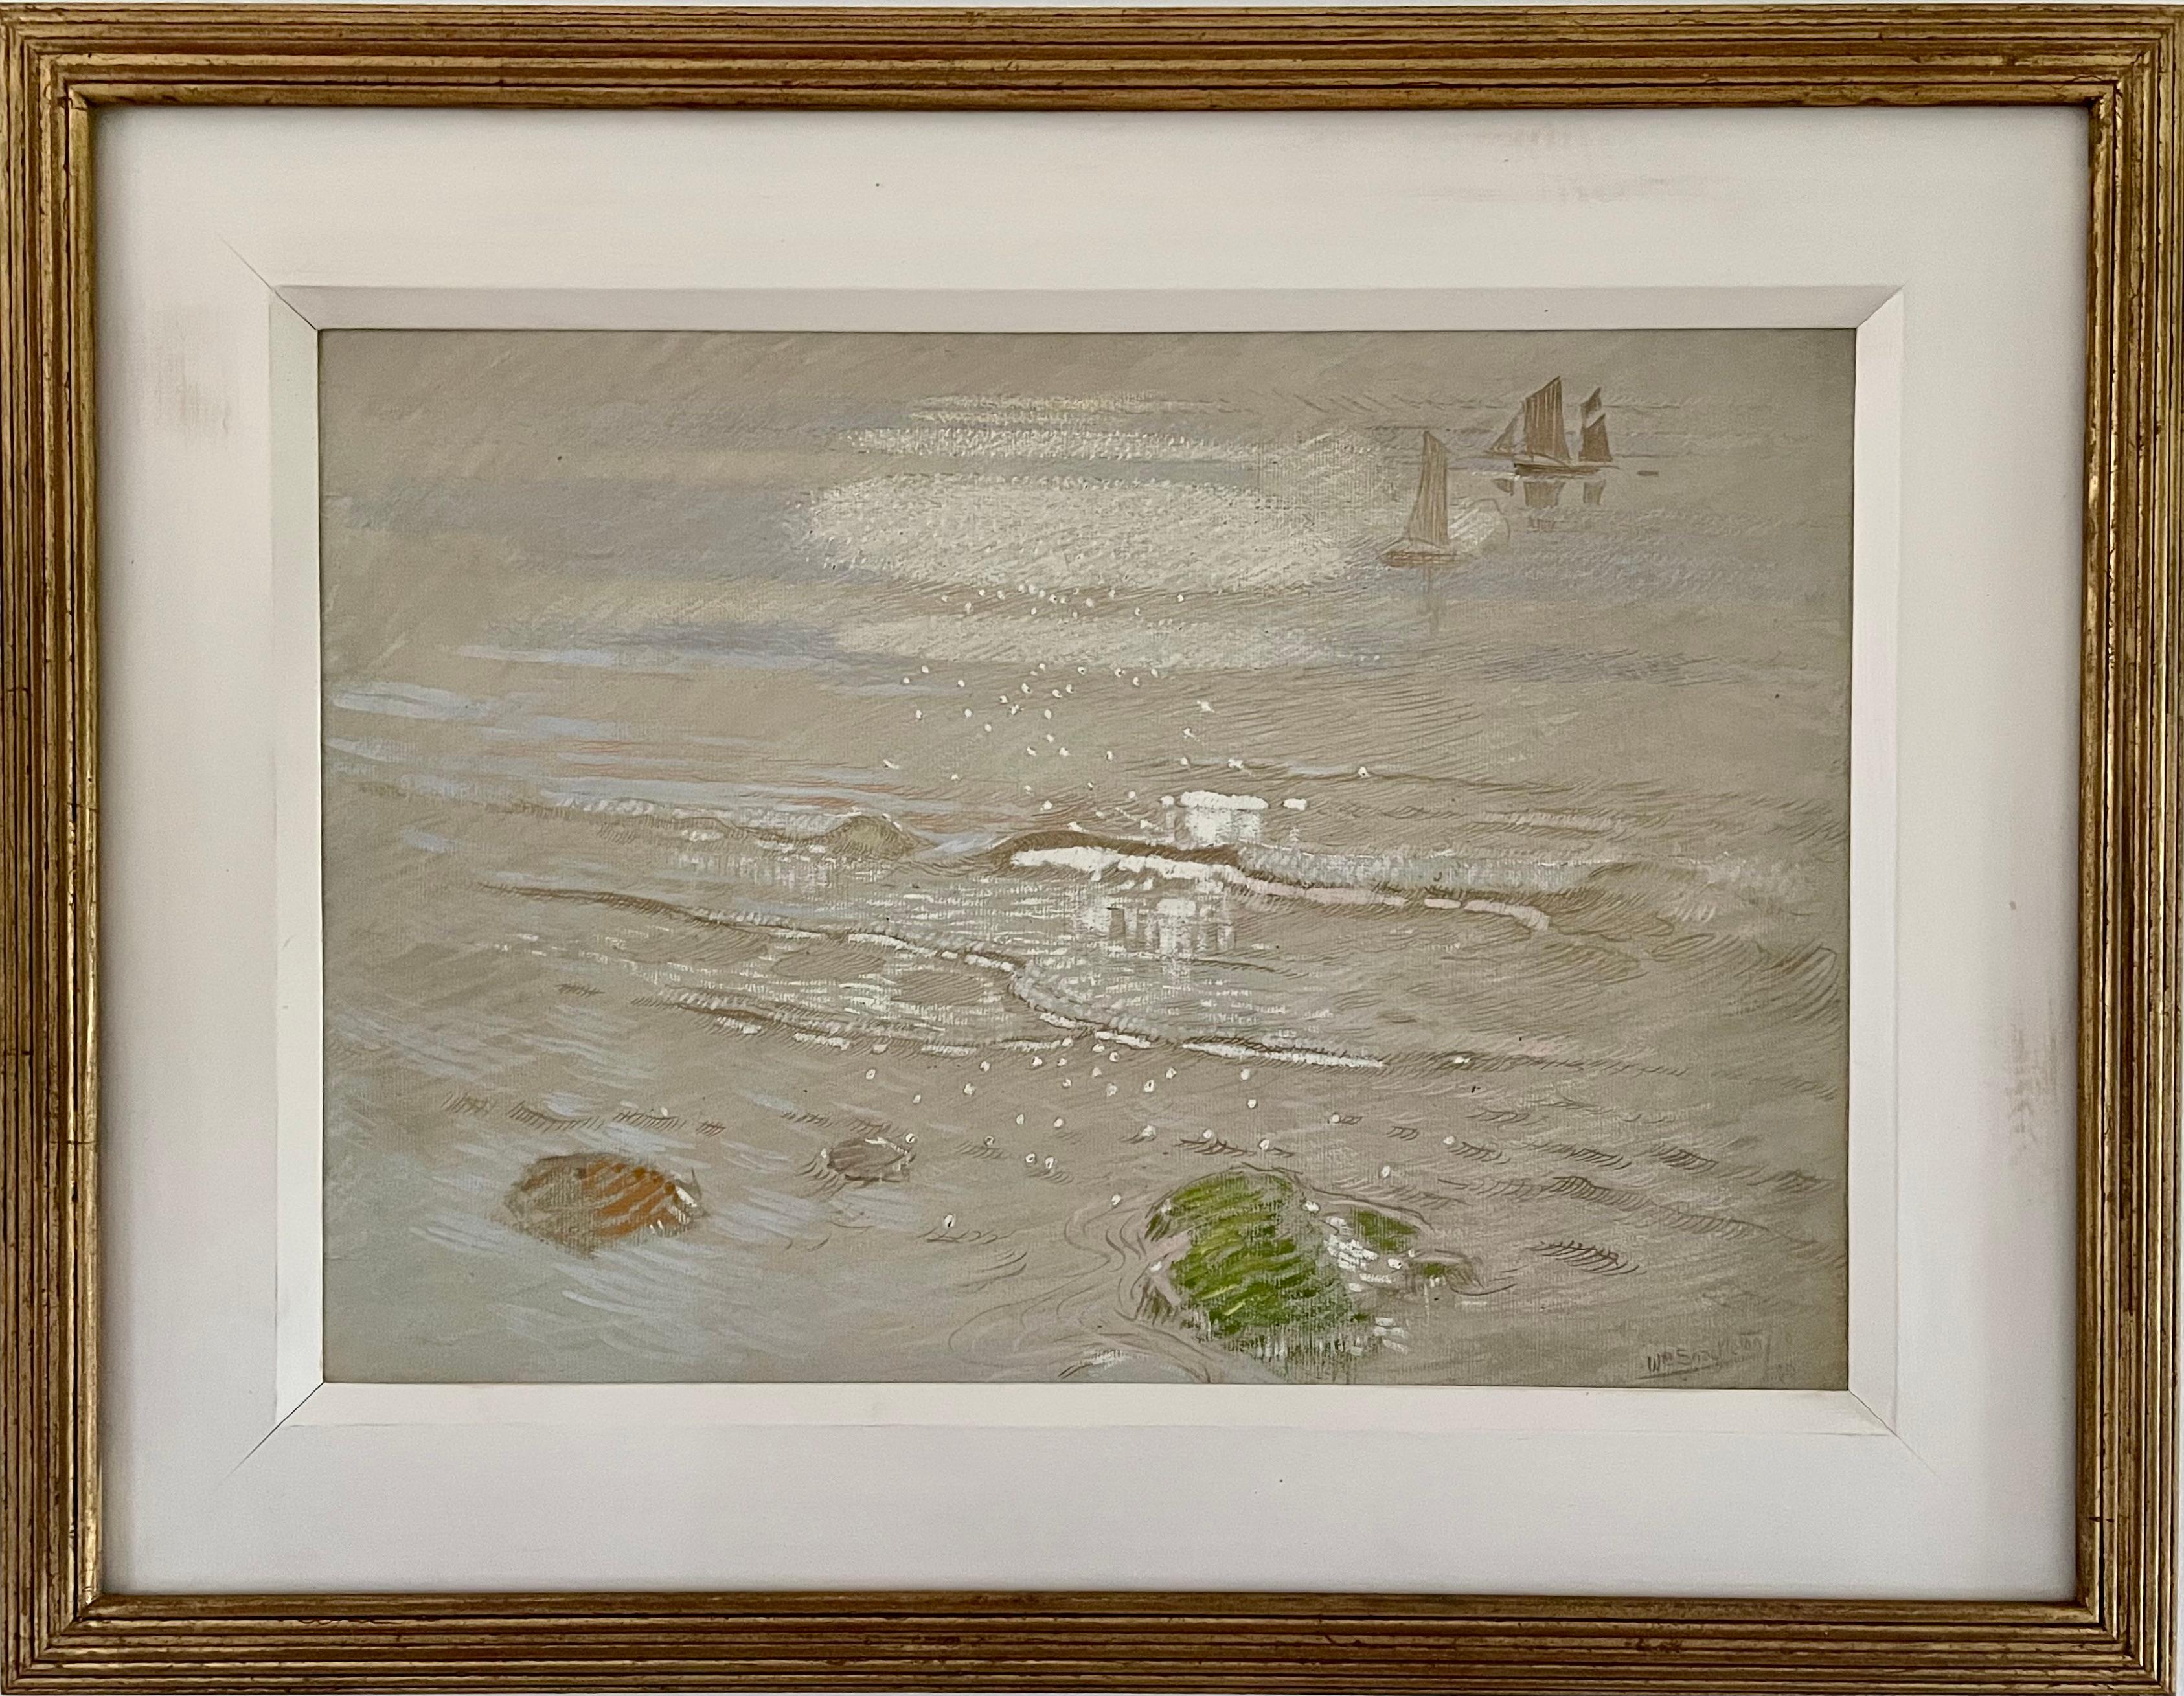 WILLIAM SHACKLETON, NEAC
(1872-1933)

The Receding Tide

Signed l.r.: Wm Shackleton
Oil and watercolour on textured paper
Framed

32.5 by 47.5 cm., 12 ¾ by 18 ¾ in.
(frame size 51.5 by 66 cm., 20 by 26 in.)

Provenance:
The artist’s studio